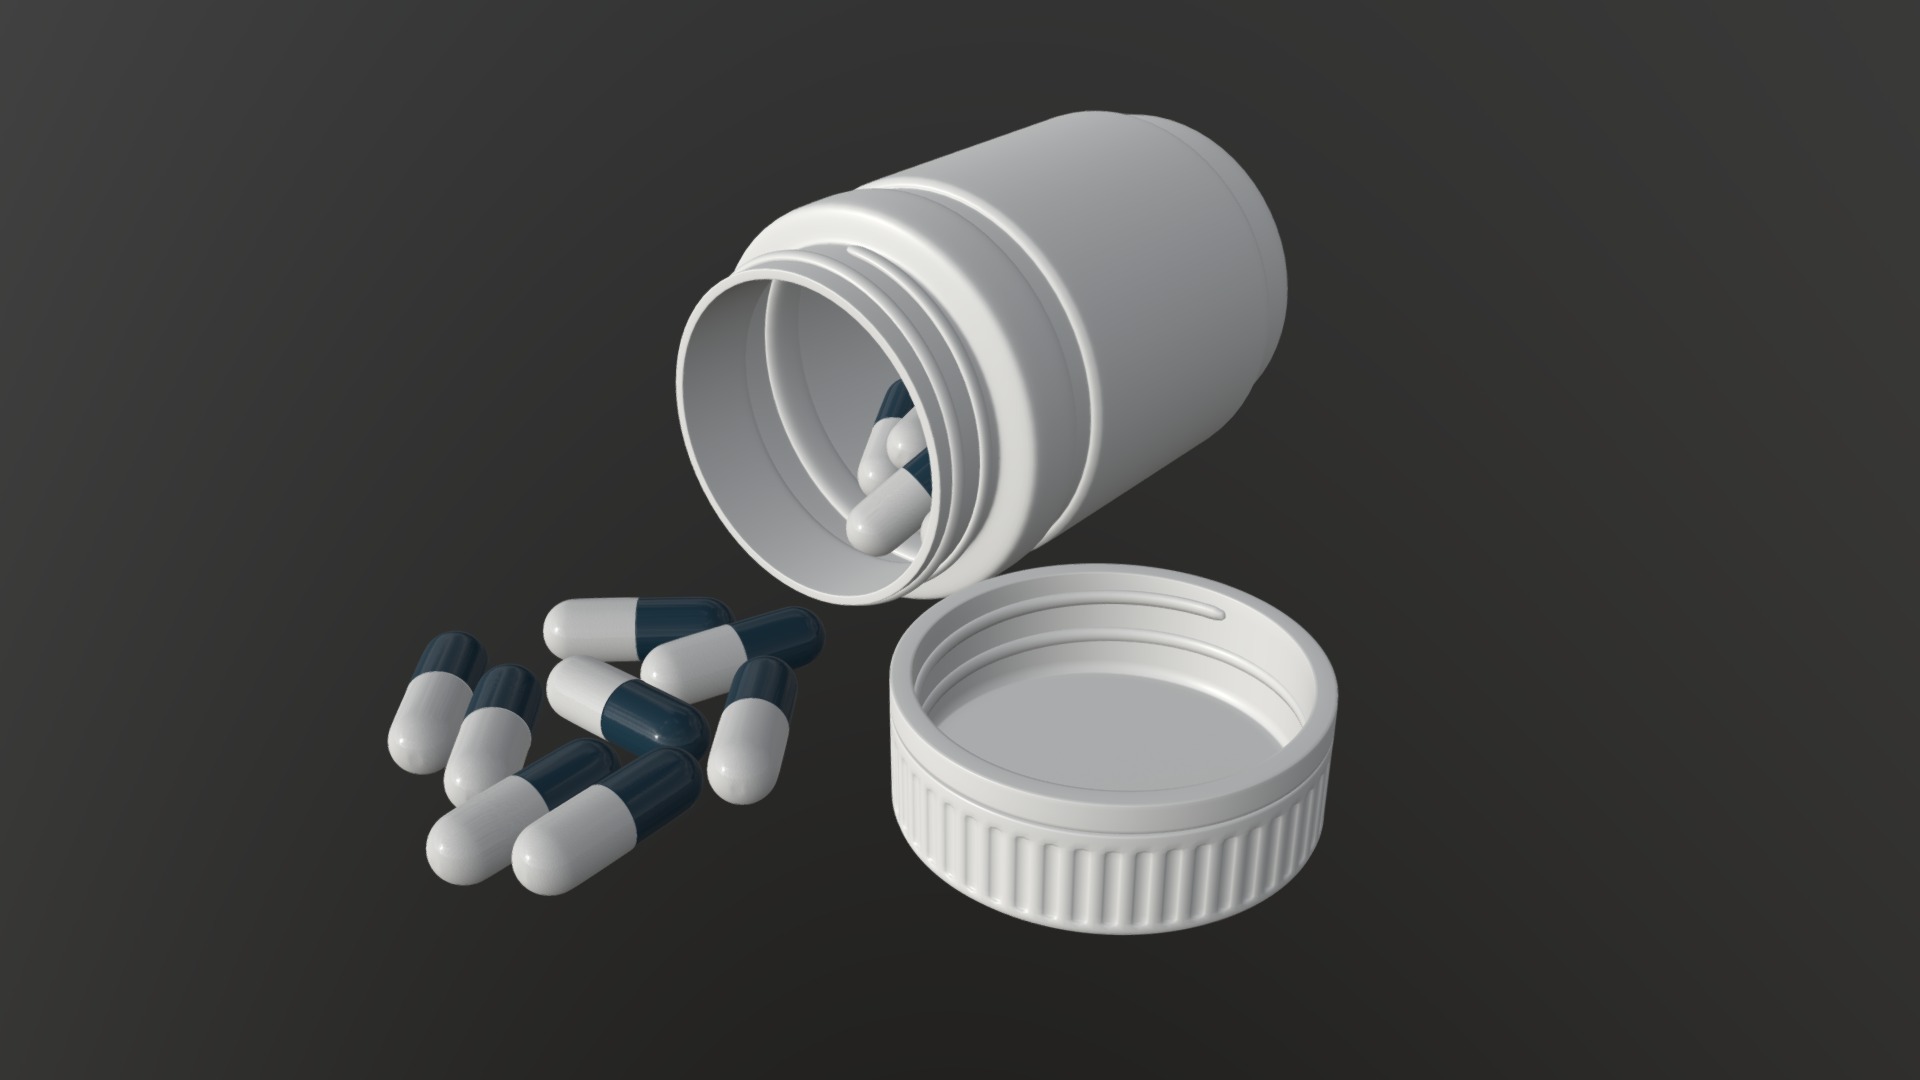 3D model bottle with pills opened - This is a 3D model of the bottle with pills opened. The 3D model is about a white and blue fan.